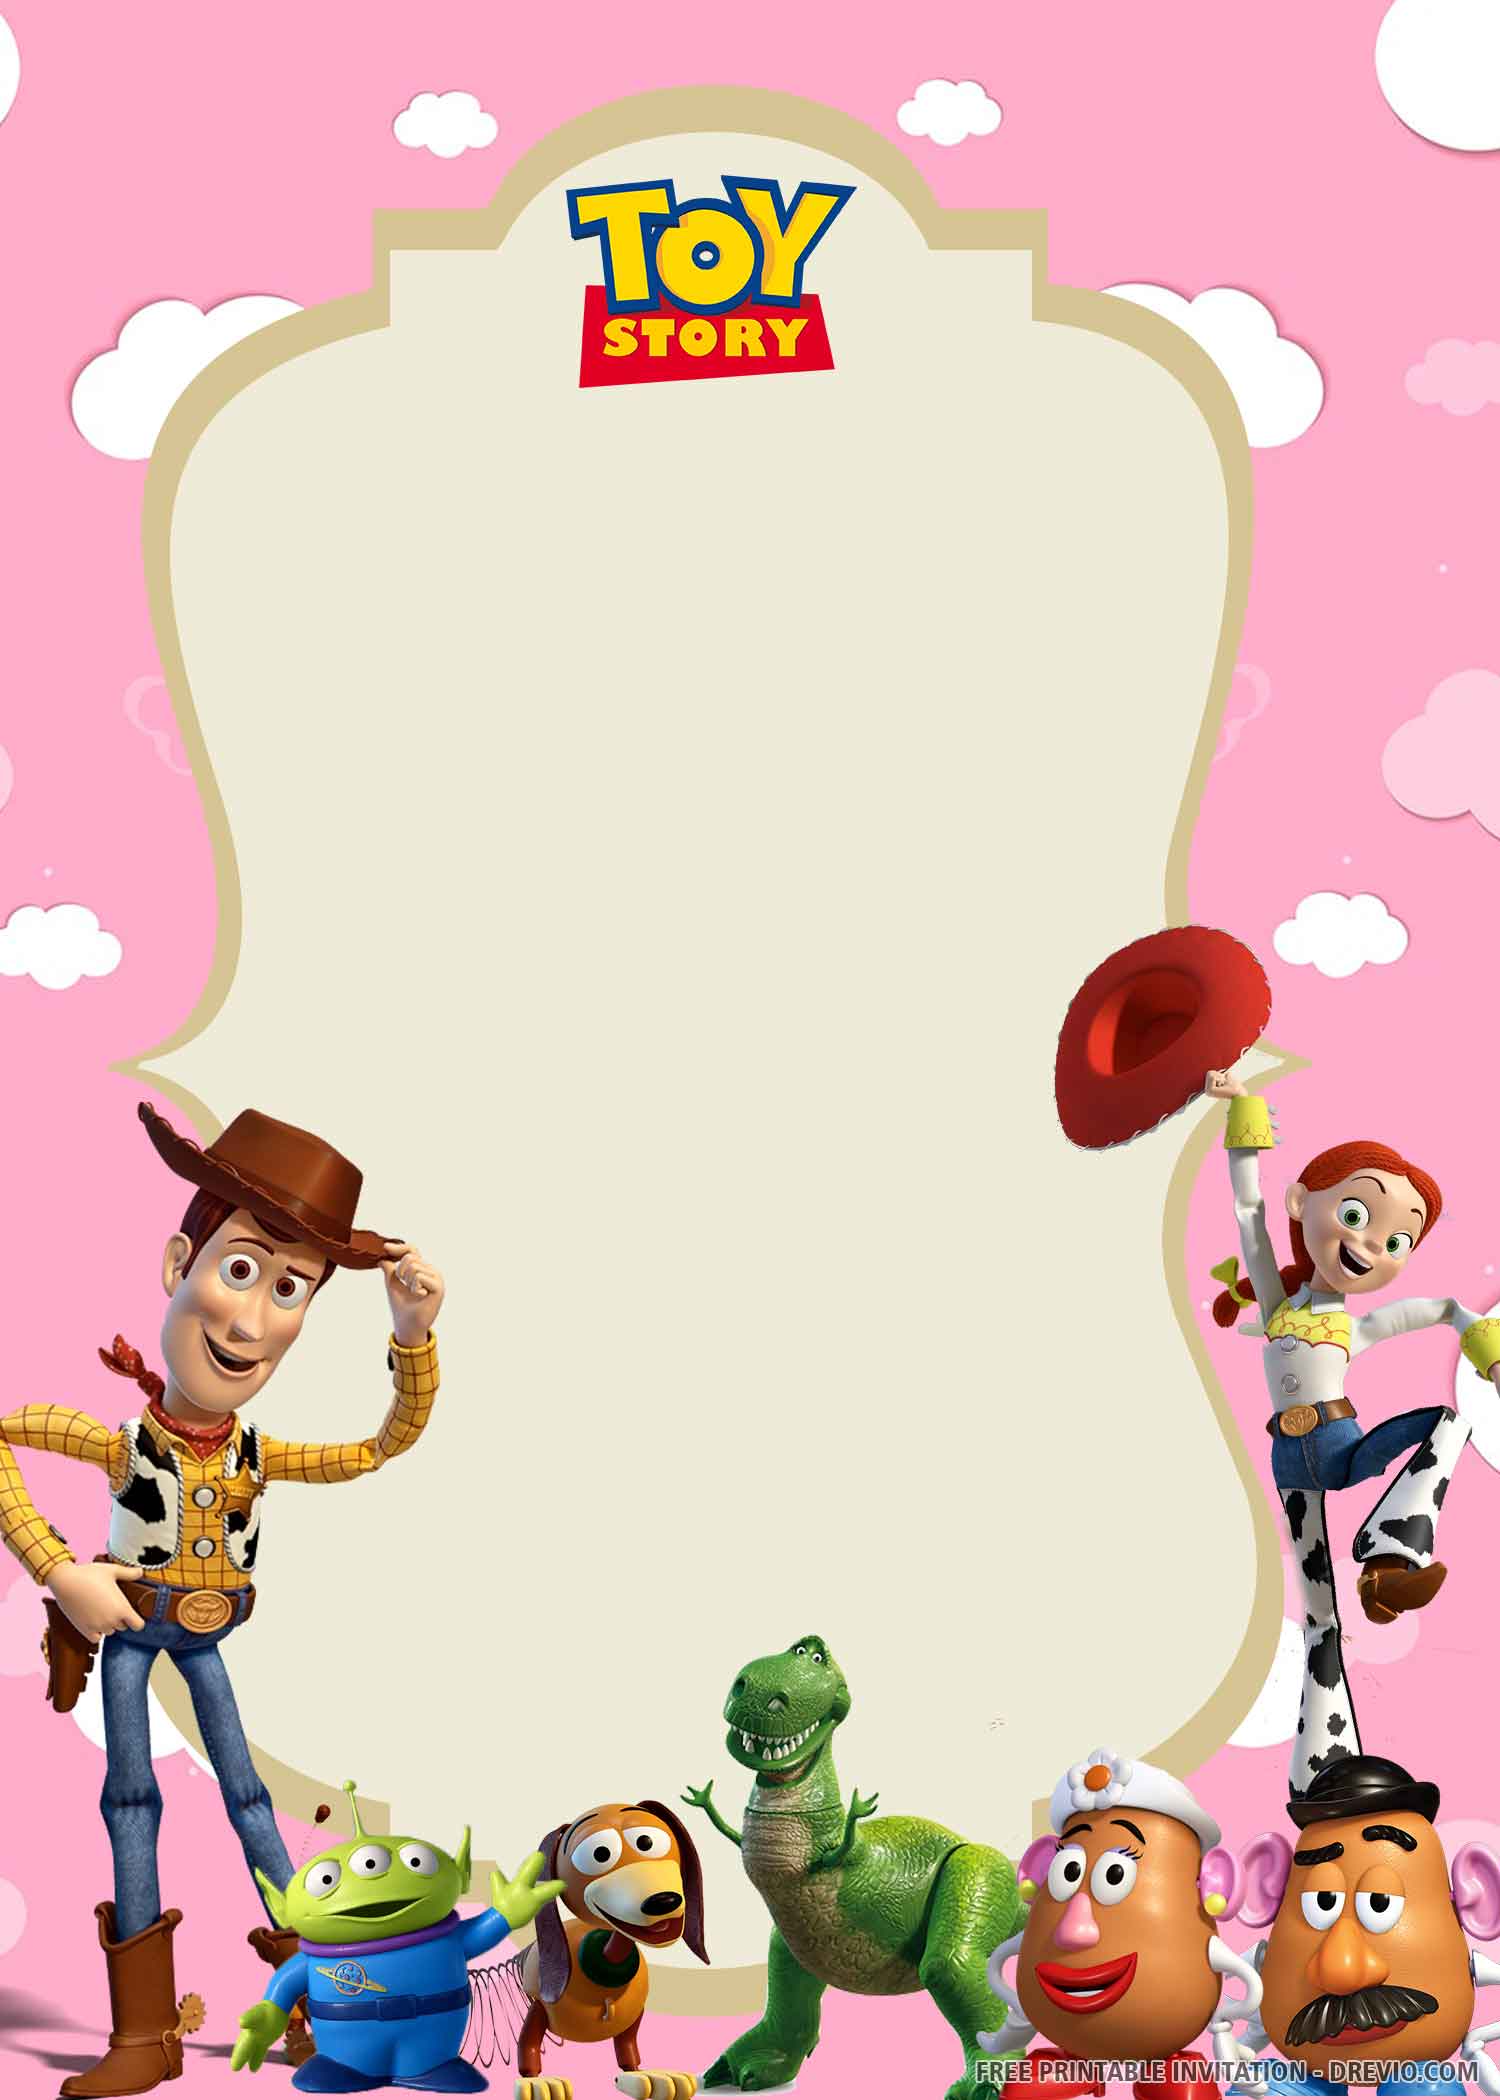 (FREE PRINTABLE) Toy Story Birthday Invitation Template Download